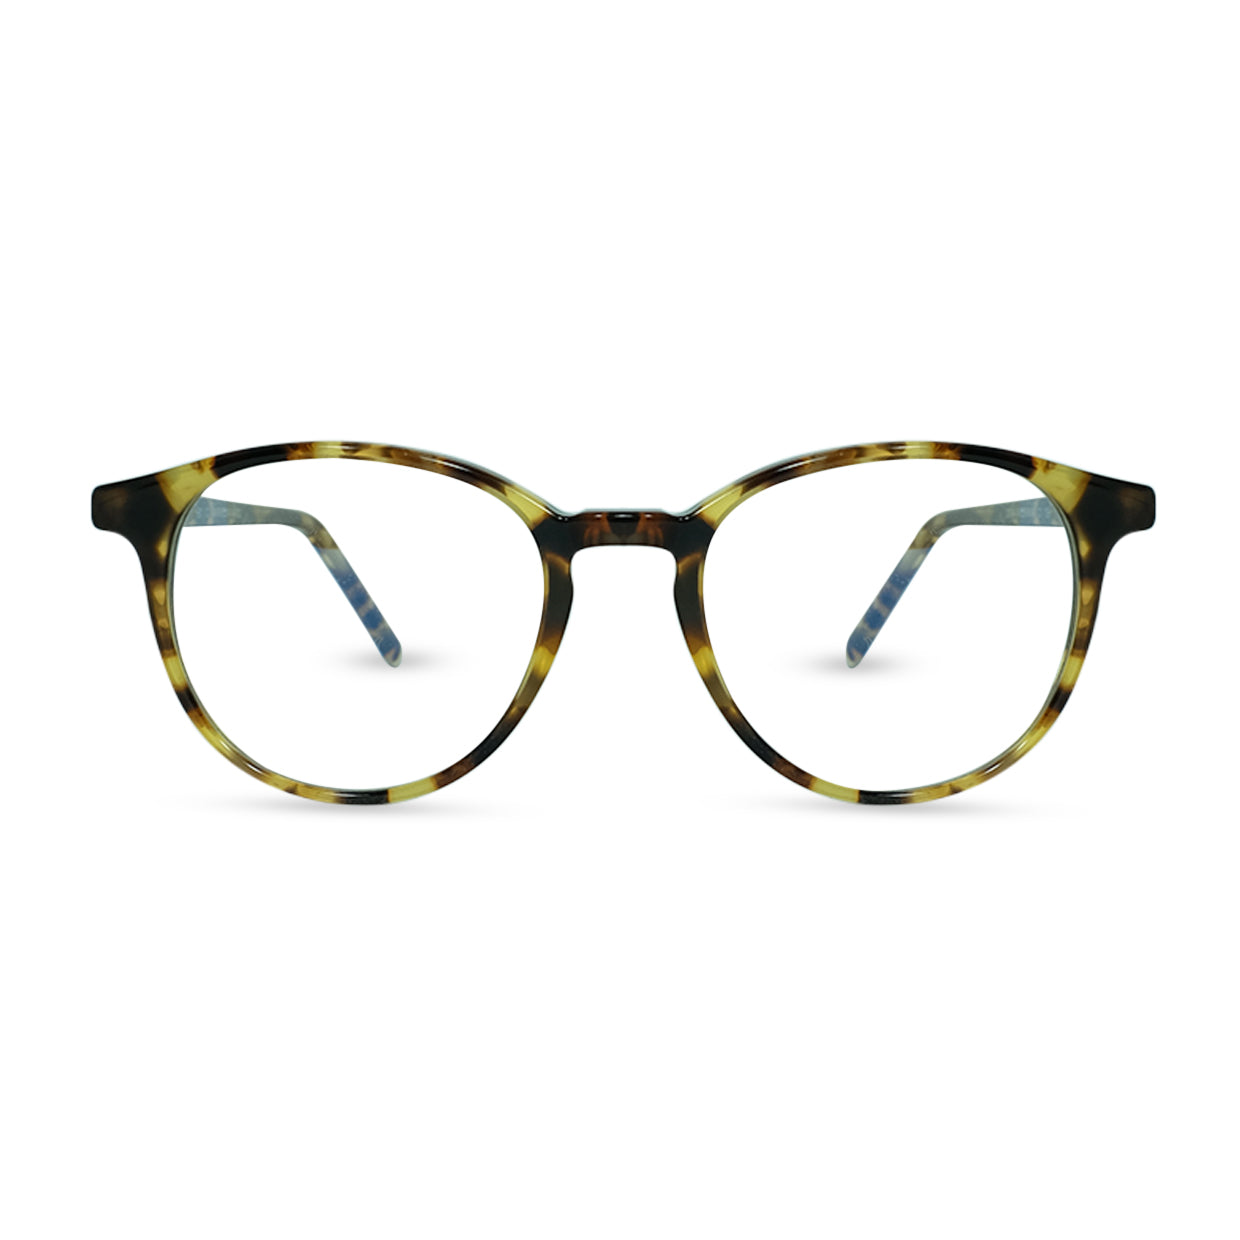 The Vincis are an environmentally friendly glasses collection inspired by Leonardo da Vinci, one of the most influential, important artist and inventor in history. The best blue filter glasses are the most fashionable blue light block glasses online. Lightweight Men's glasses in Premium Tortoise Acetate Material.